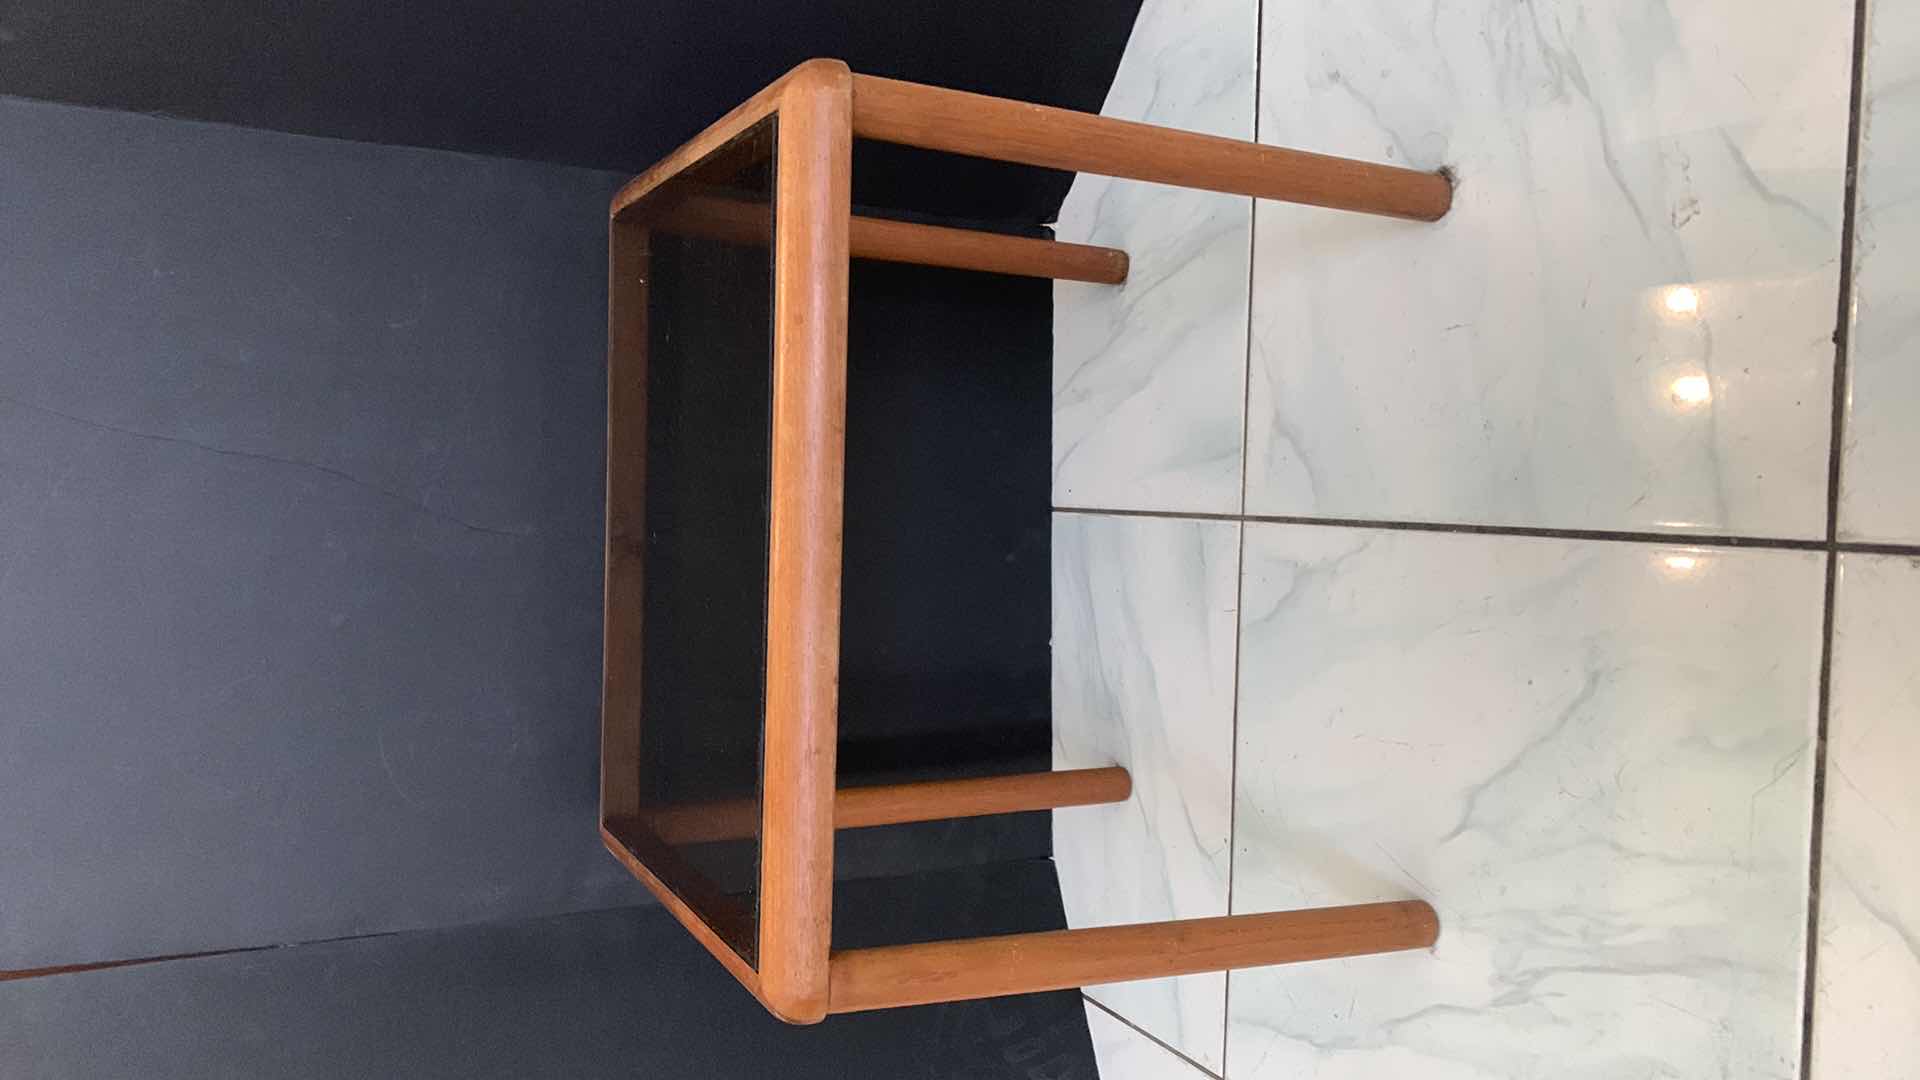 Photo 4 of WOOD W GLASS TOP SMALL END TABLE 20” x 16” x H18.5”